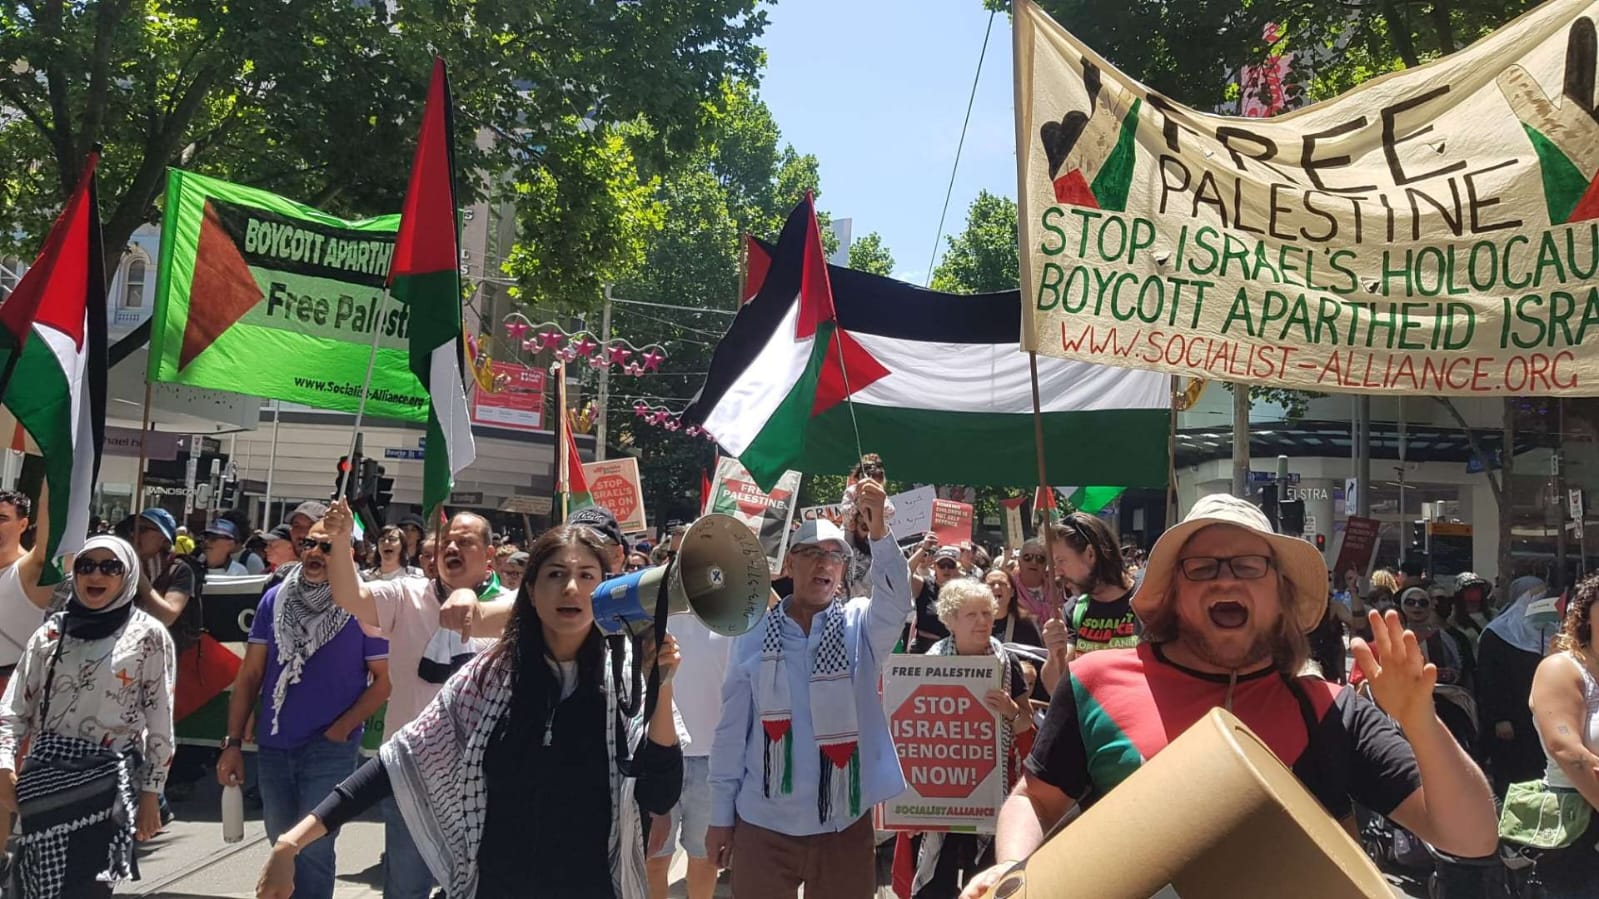 Naarm/Melbourne Free Palestine rally